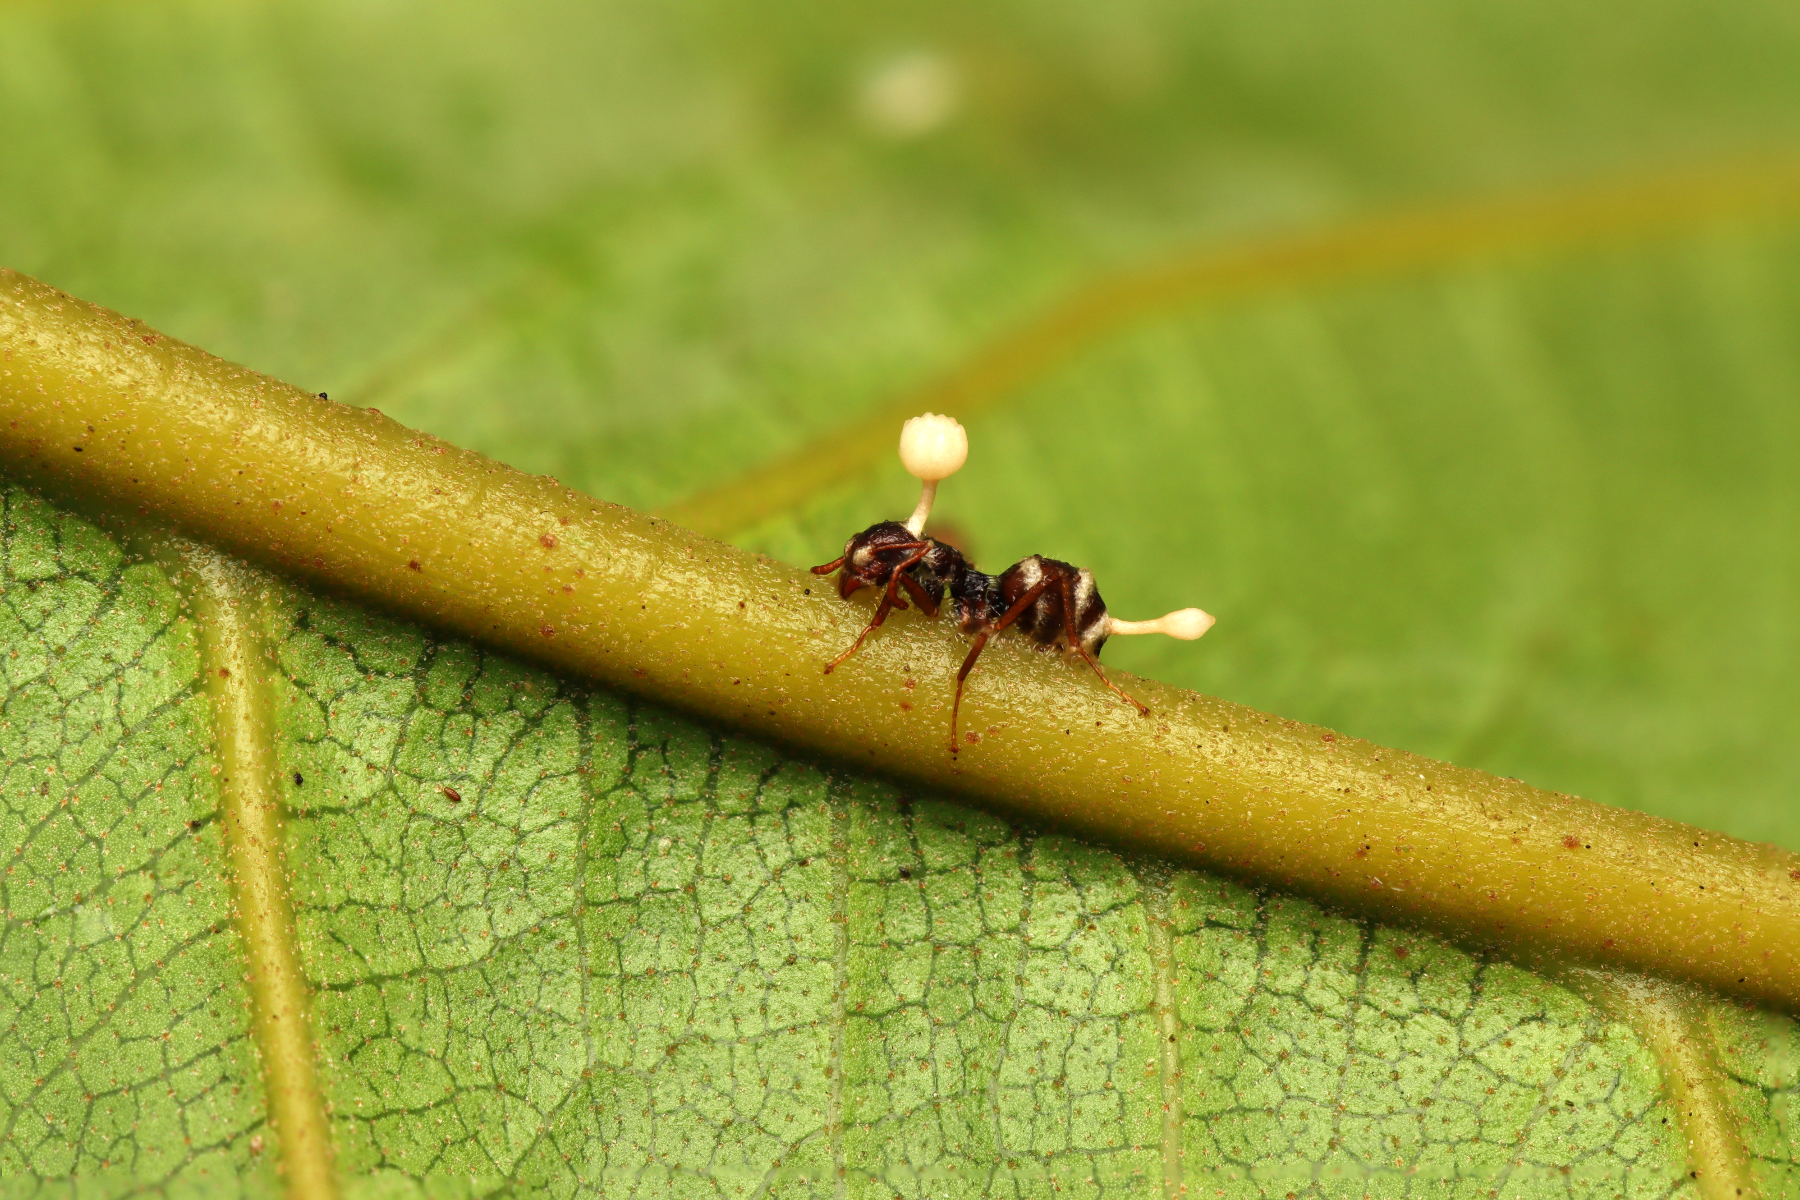 A dead ant on a leaf